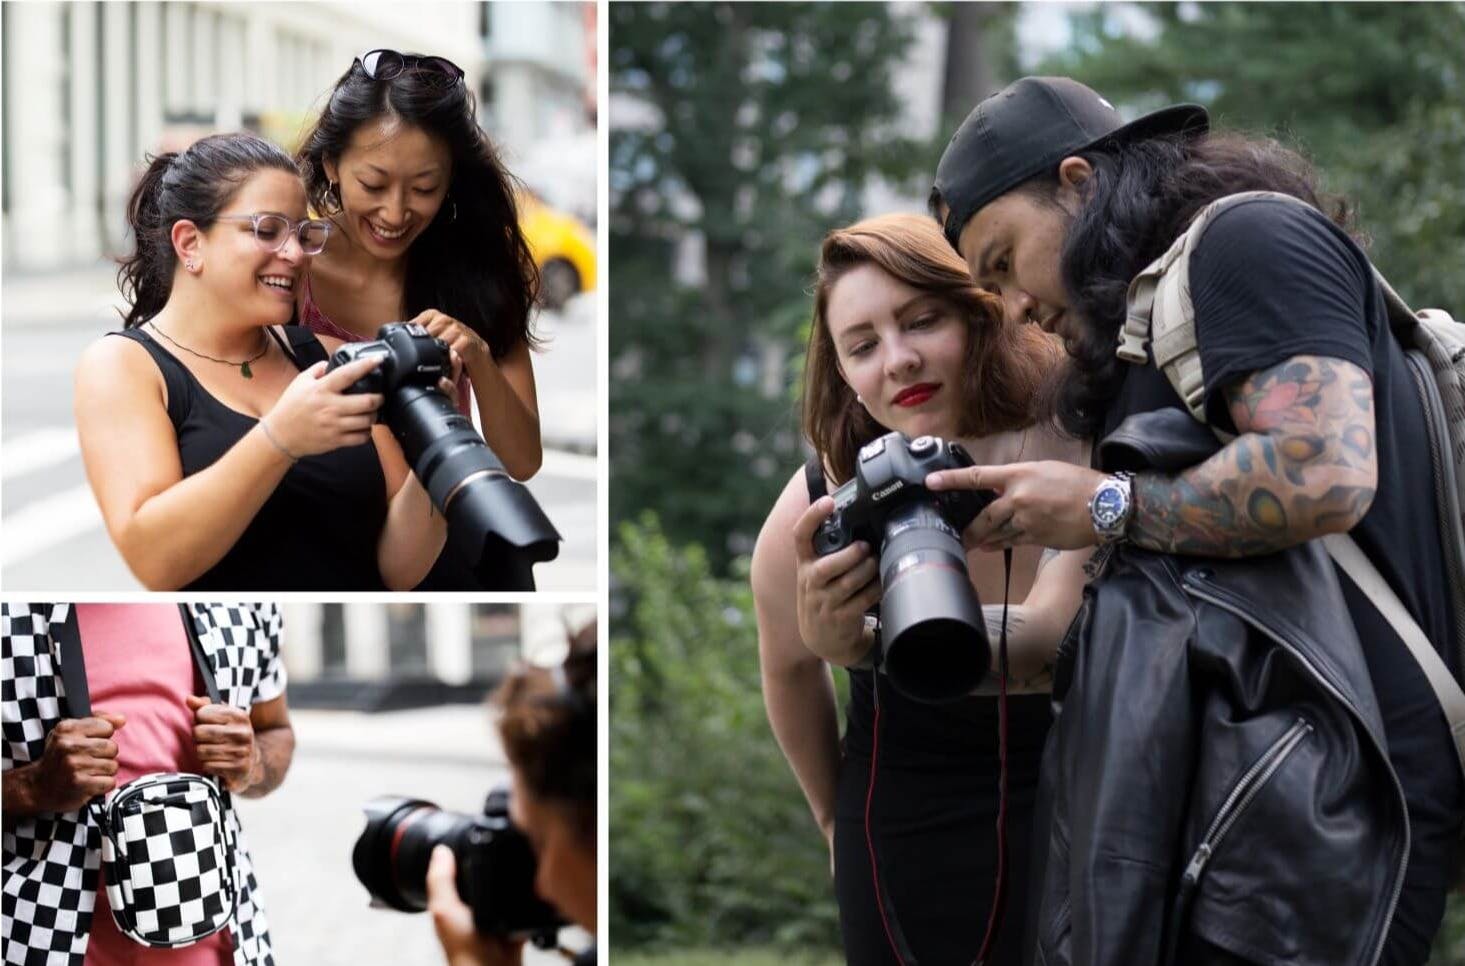 Two people holding cameras and reviewing photos together outdoors